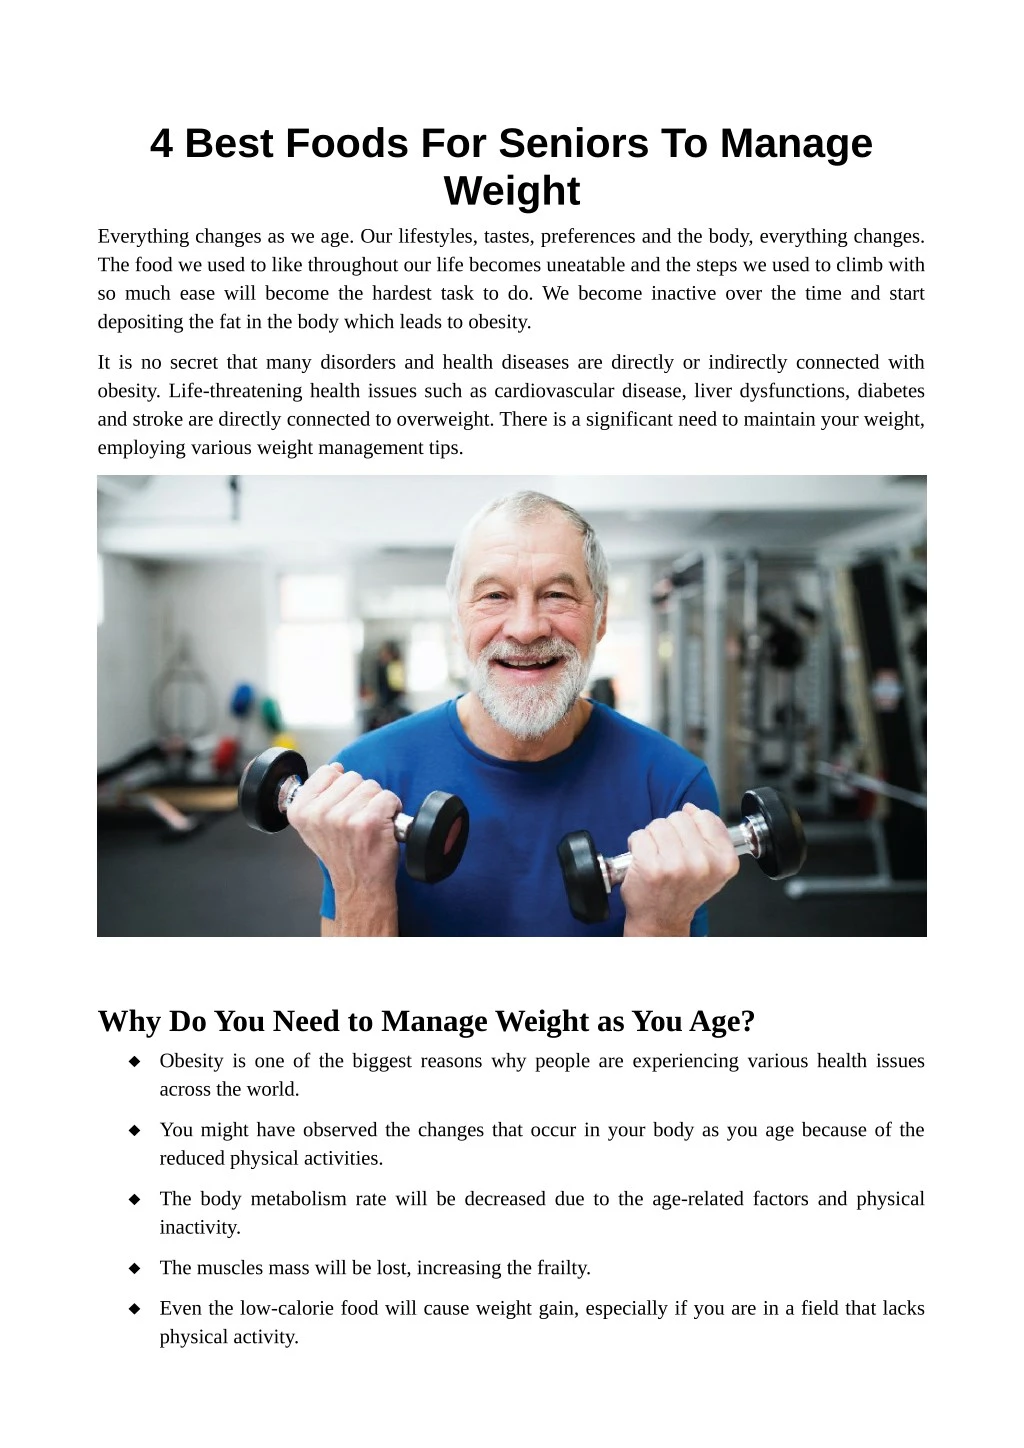 4 best foods for seniors to manage weight